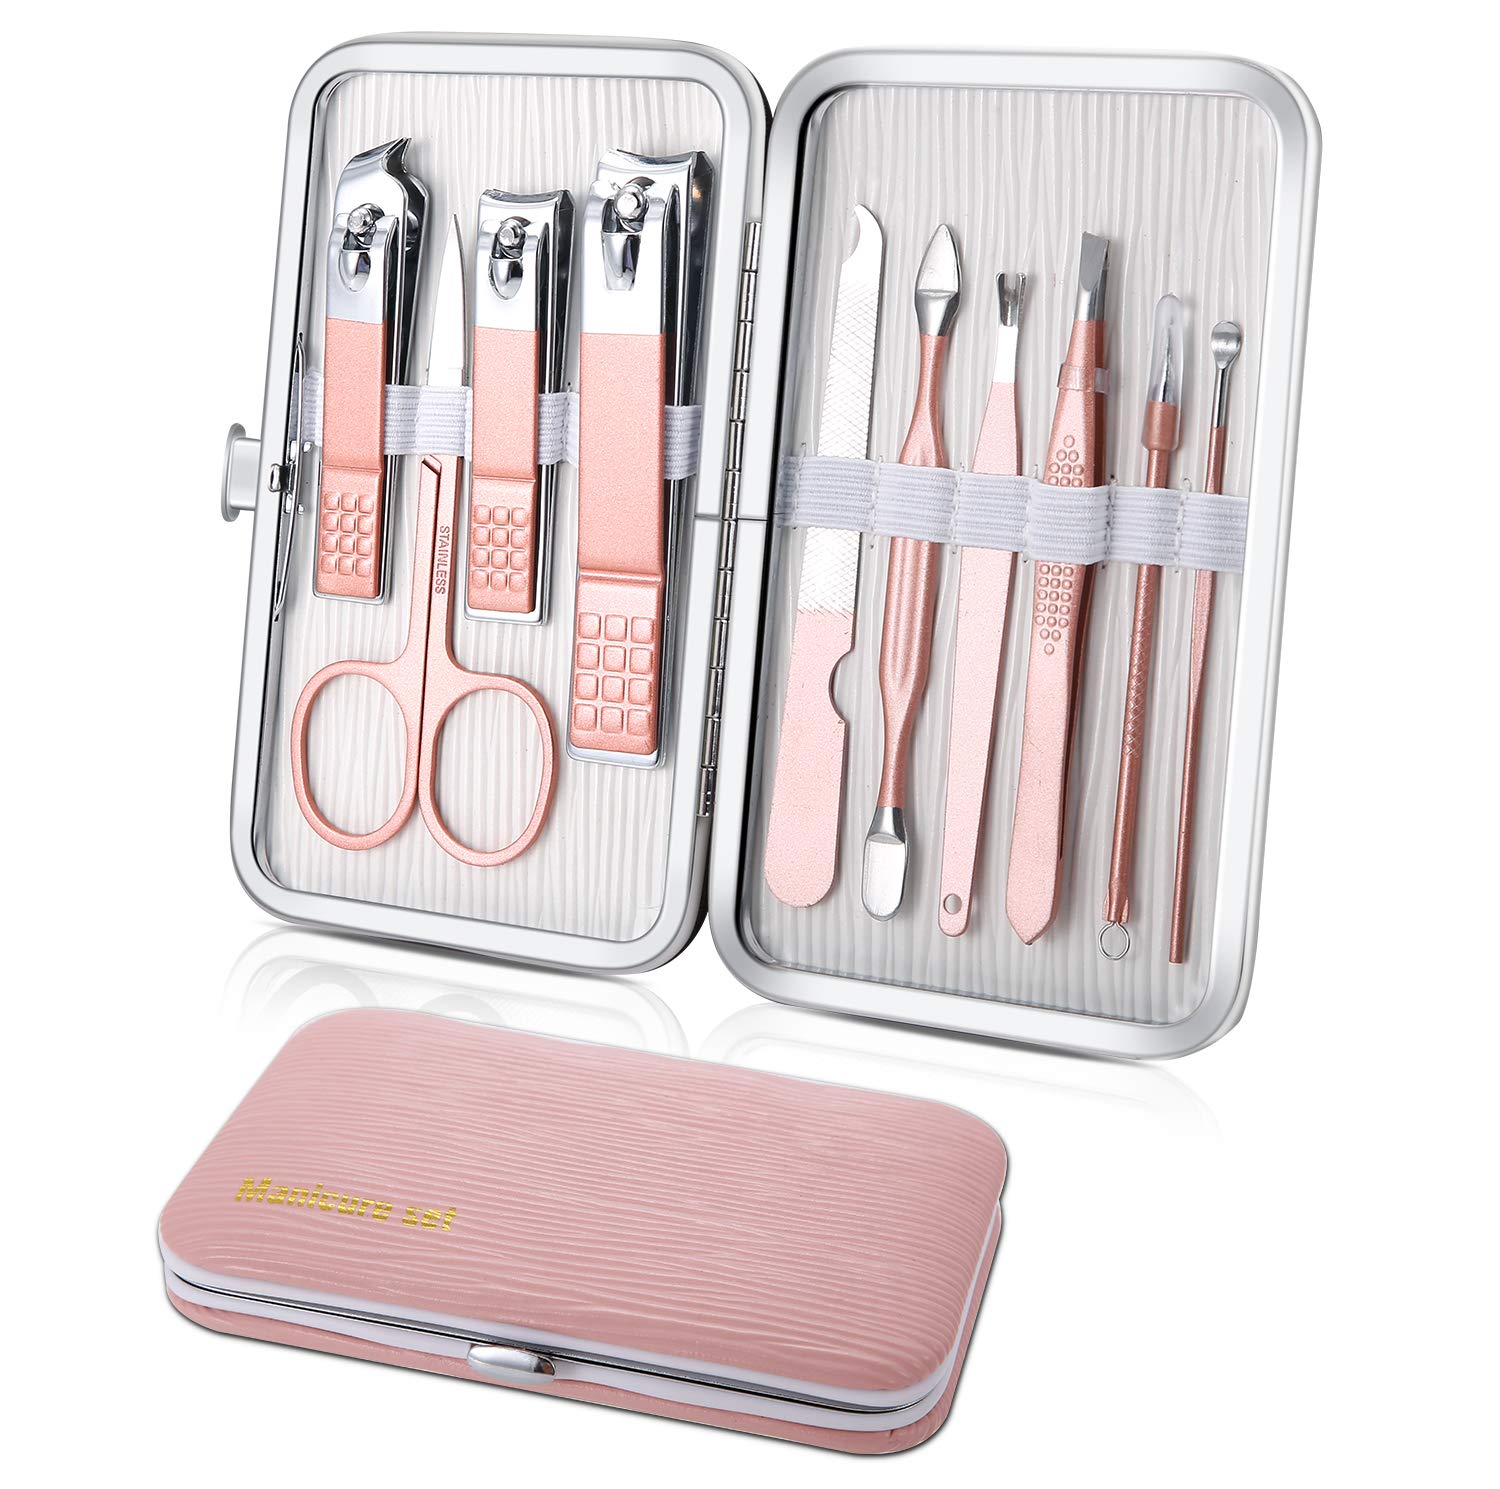 Hot Pink 4 Pc Manicure Set with Travel Case - Nail Care Kit | Surgical Mart